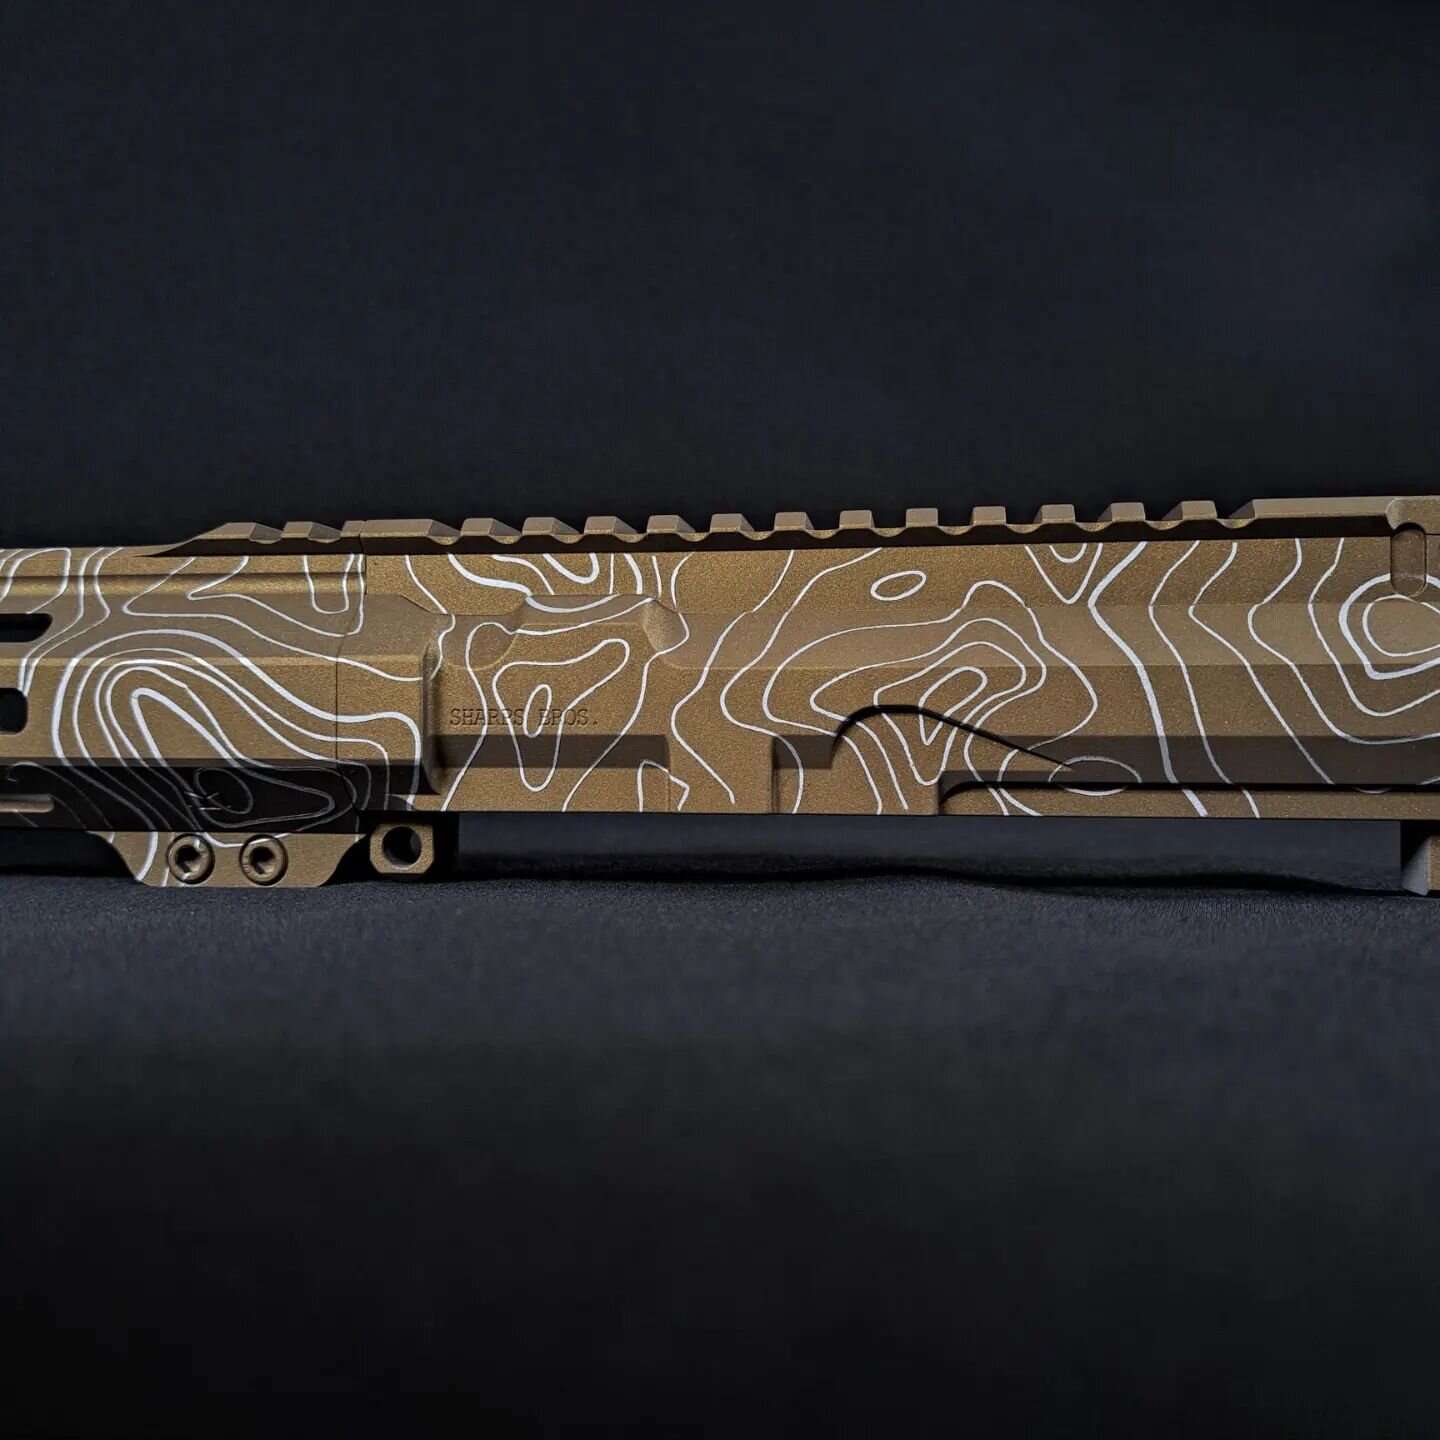 A little Satin Aluminum and Burnt Bronze Topographic Pattern to kick off the month? Projects like this one are the reason we love Cerakote so much. As an added feature, before coating we opened up the ejection port with our mill so it can reliably ej